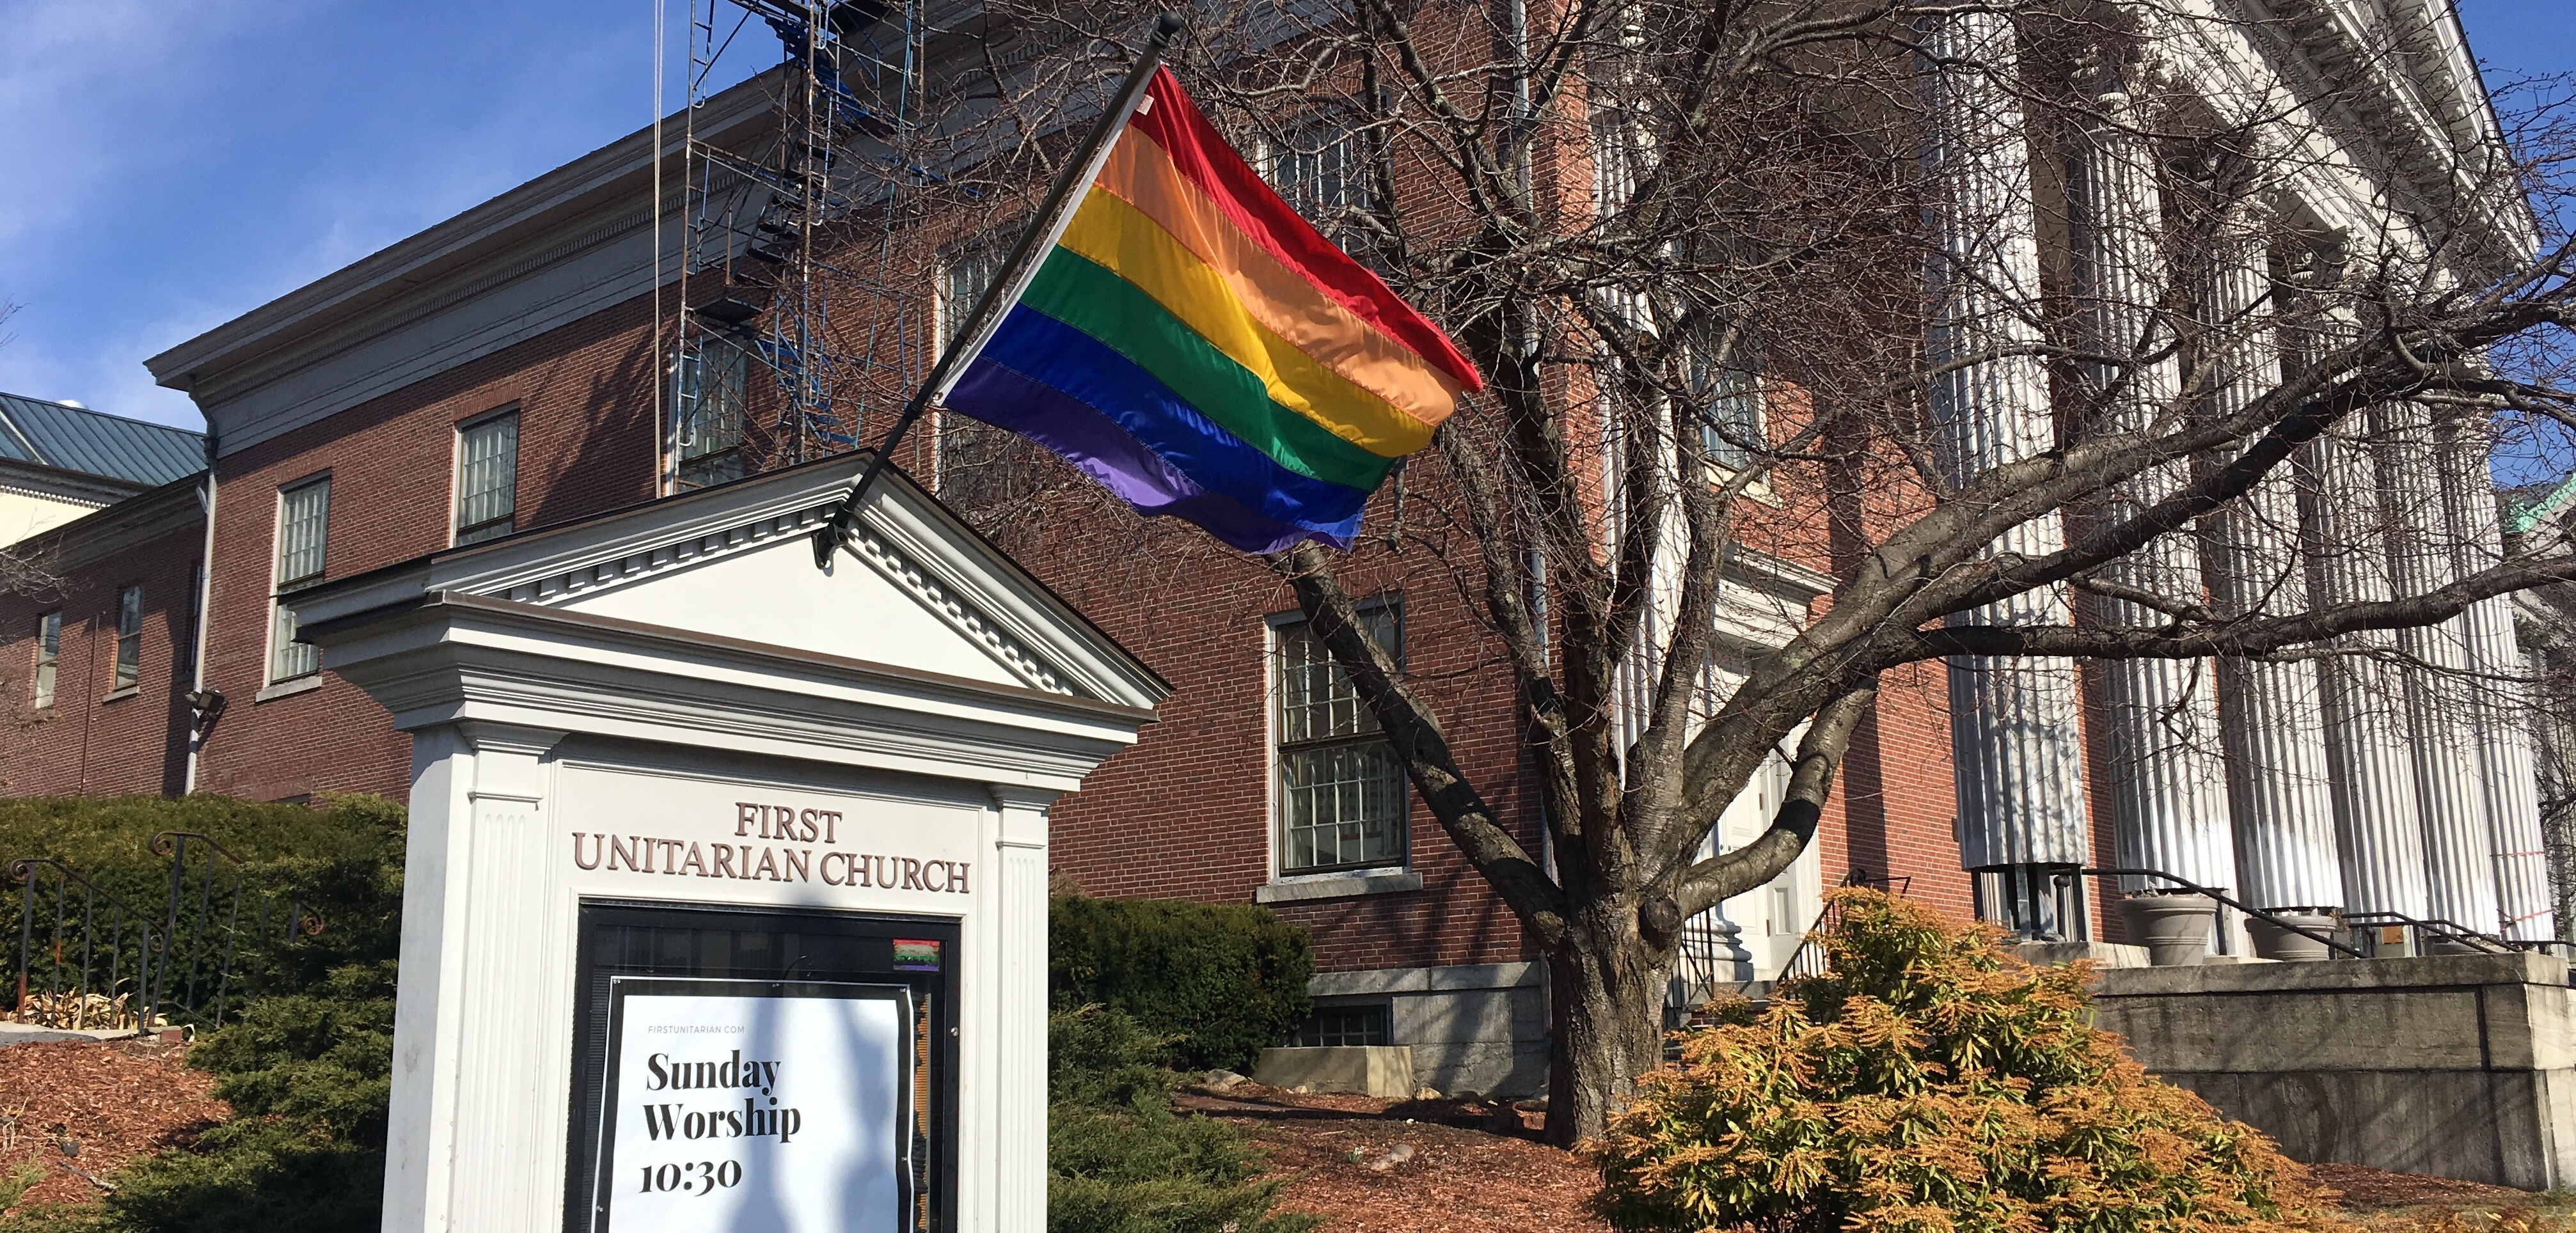 Wayside pulpit with rainbow flag in front of First Unitarian Church